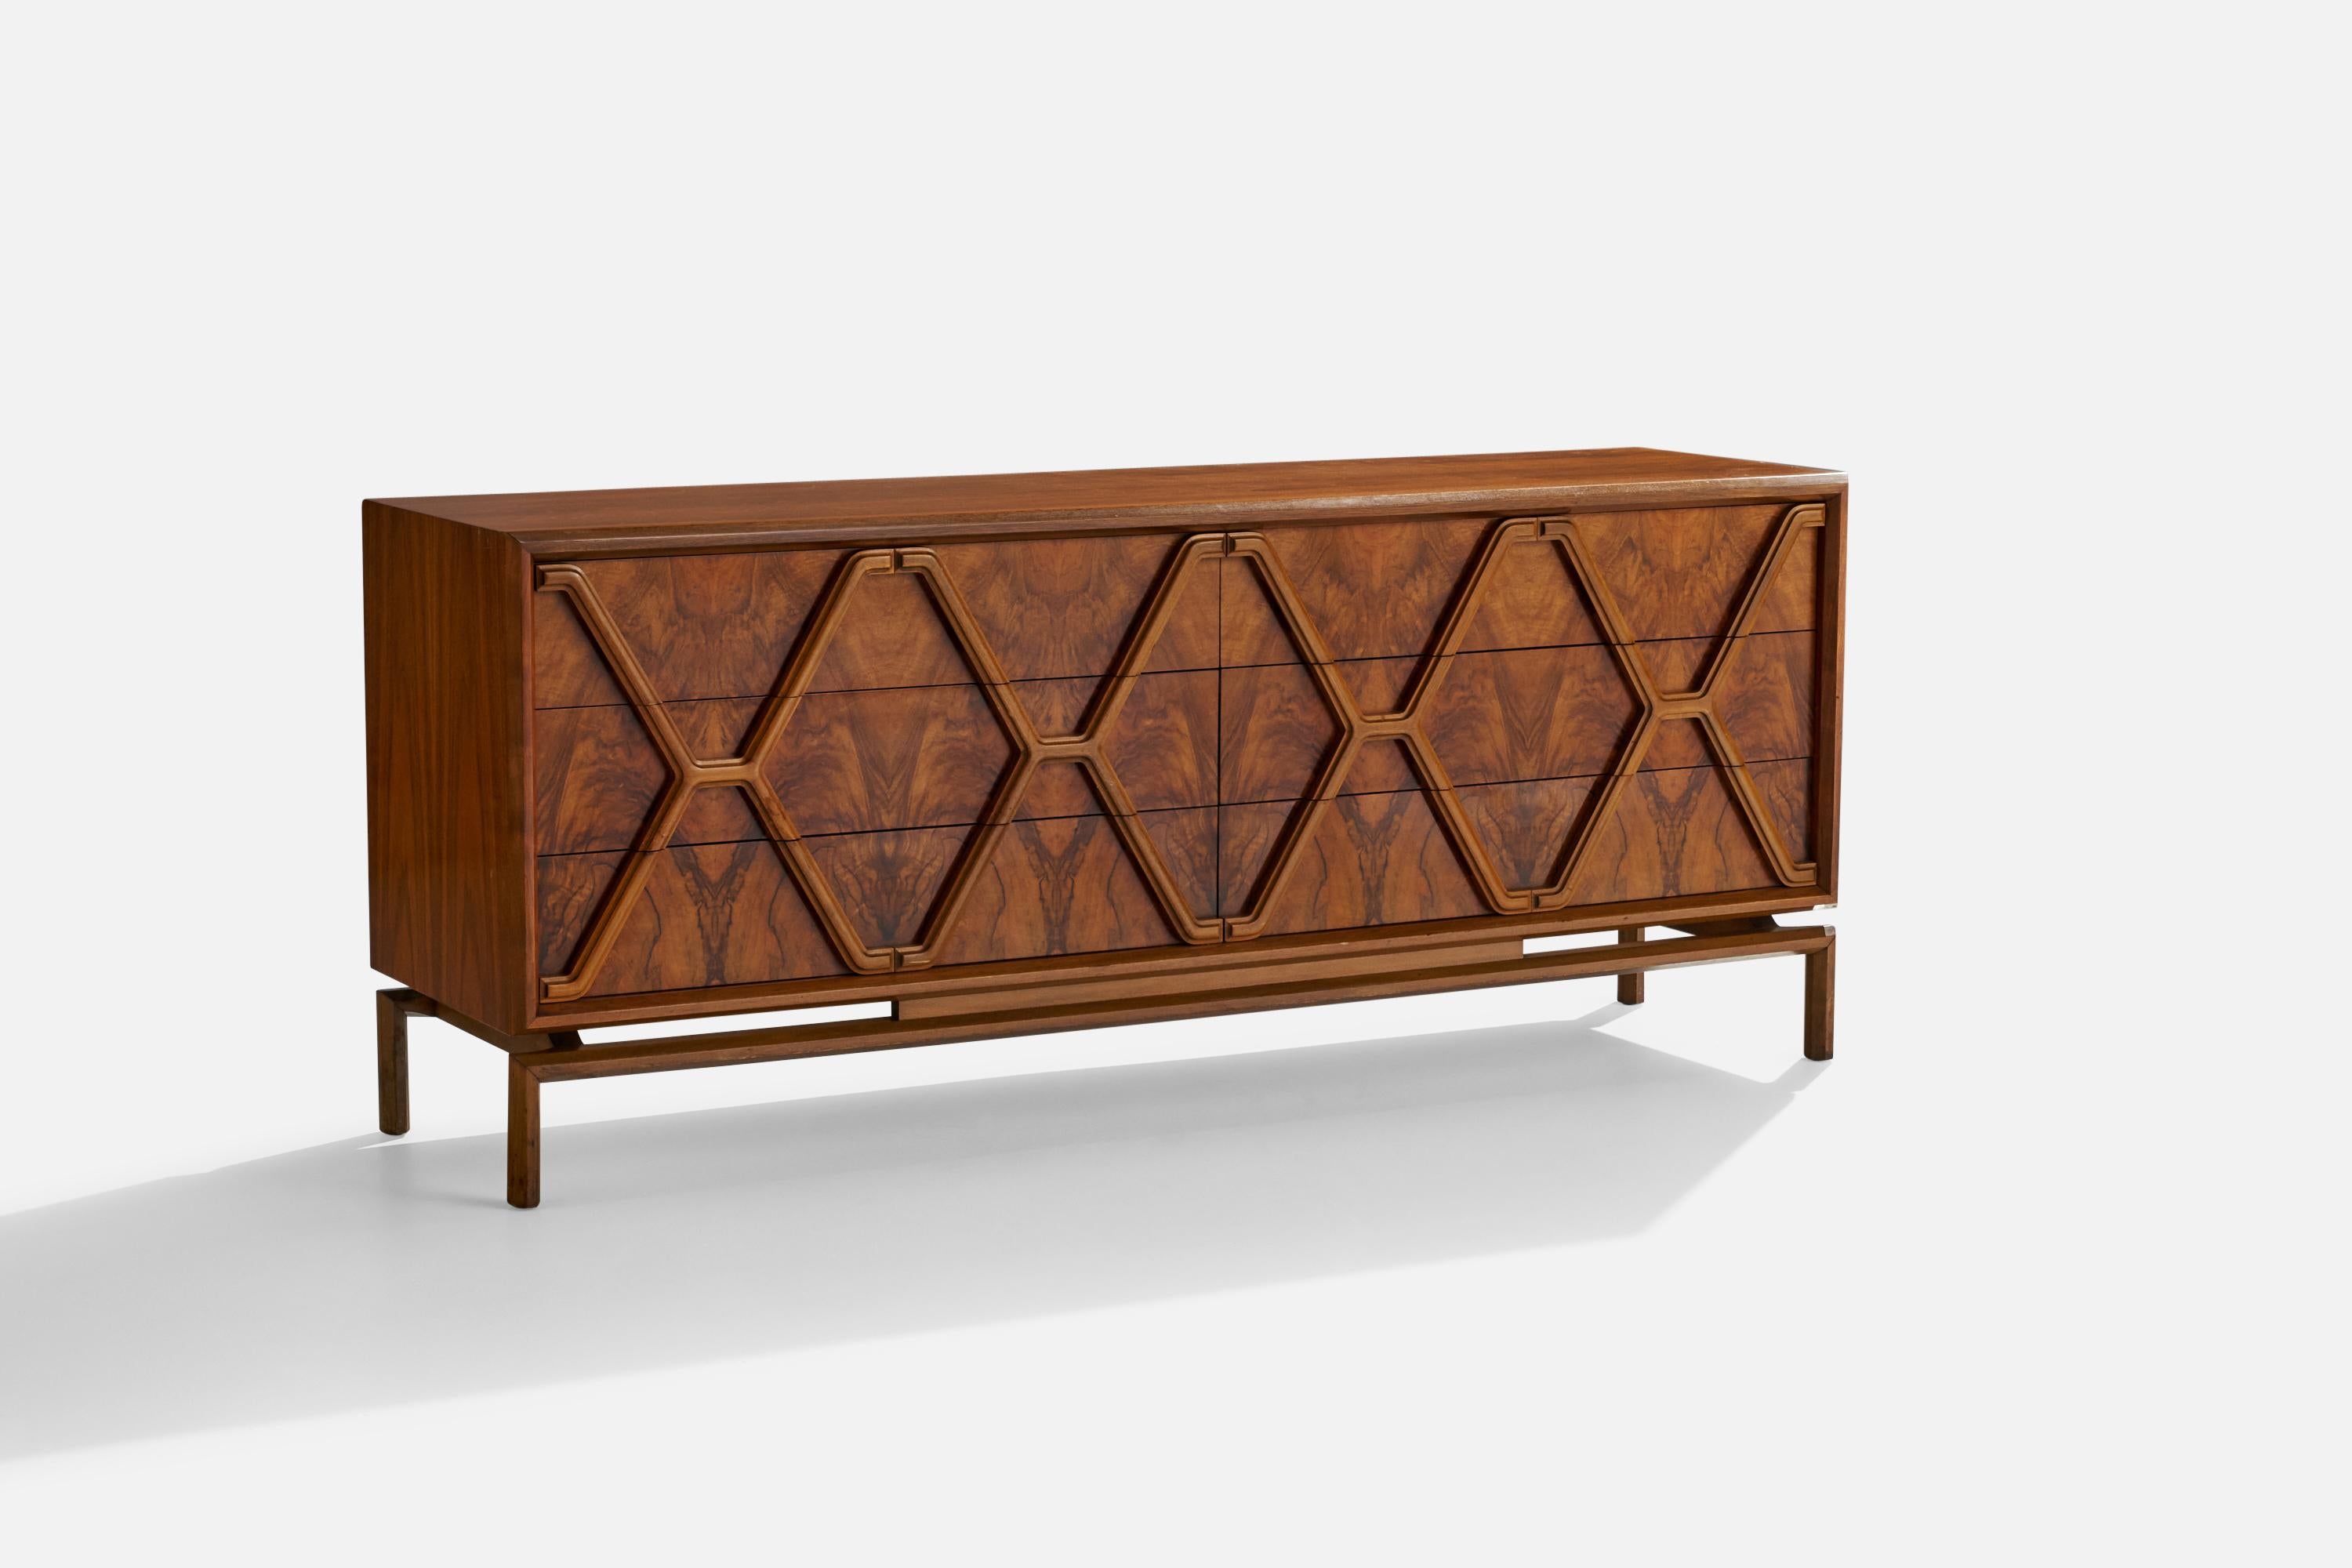 A rosewood dresser designed and produced by American designer Edmond J. Spence and produced in Sweden, c. 1950s.